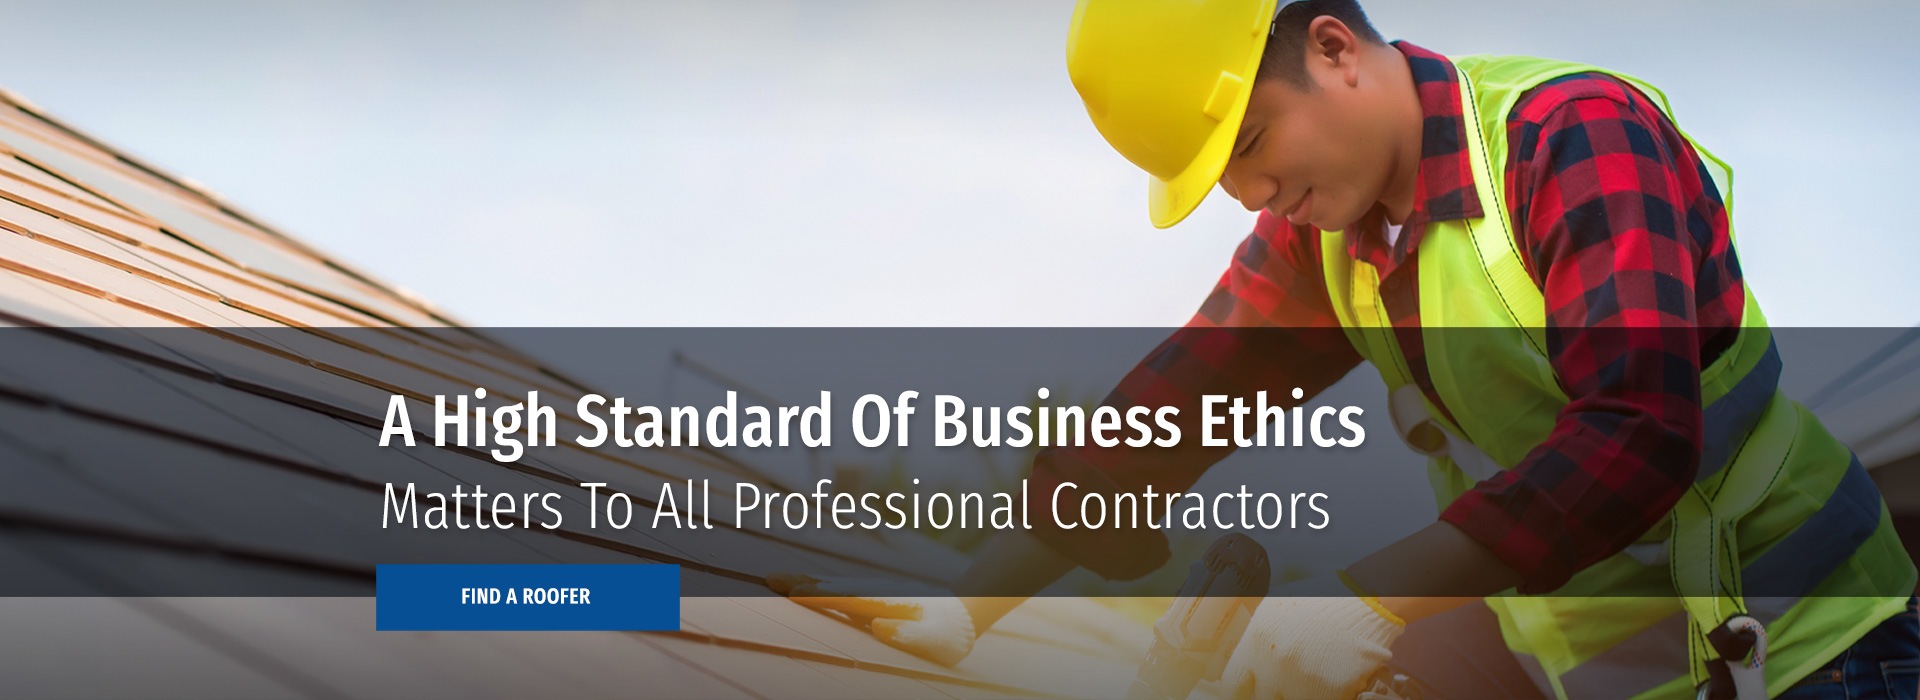 High Standard of Business Ethics